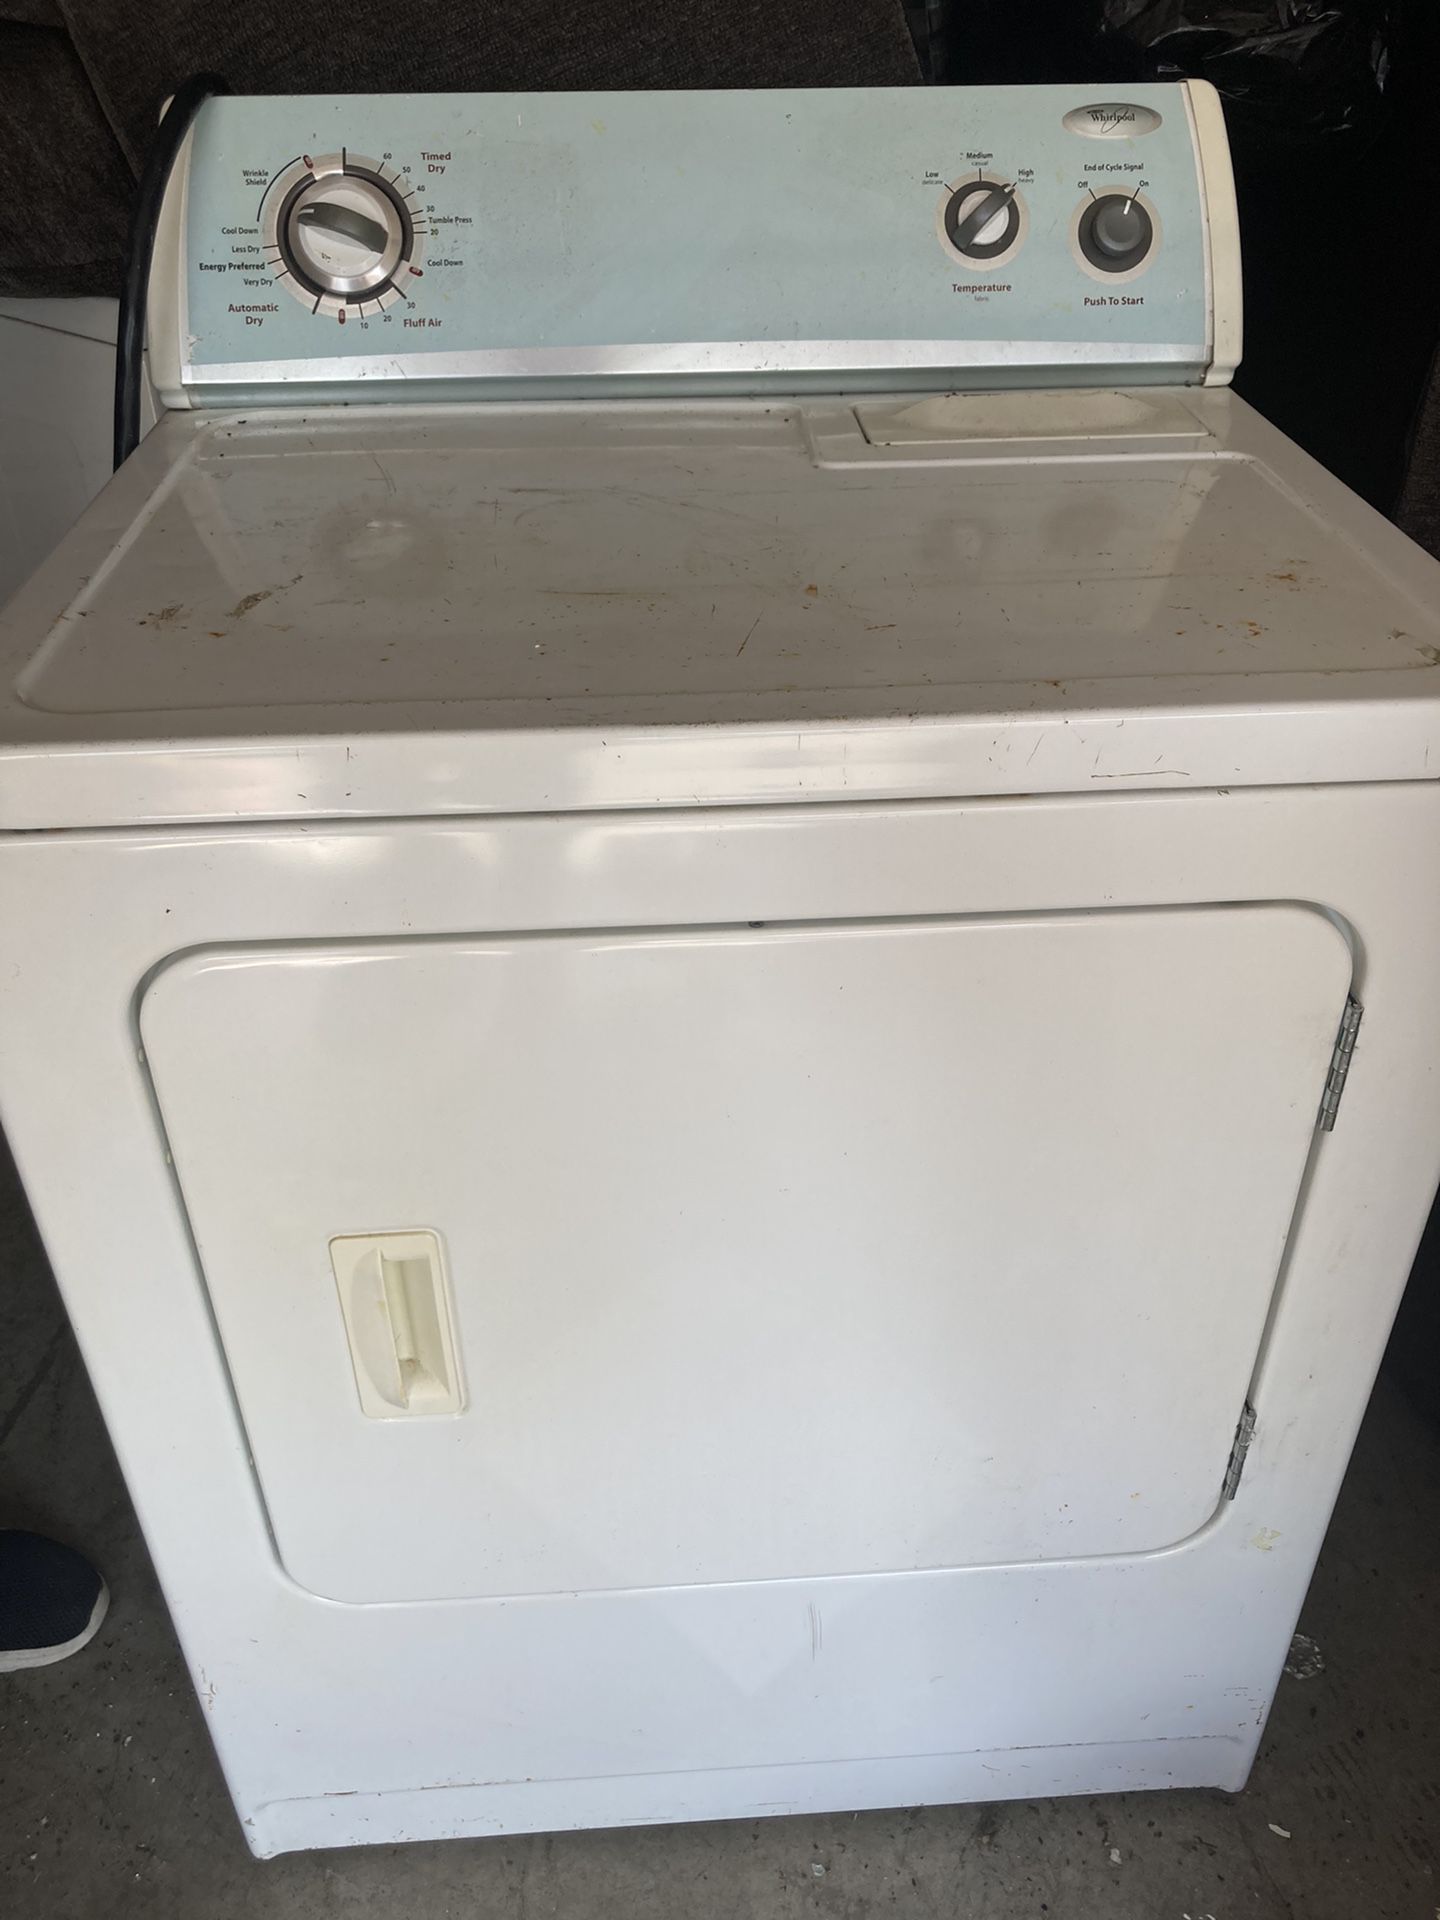 Washer/Dryer For Sale